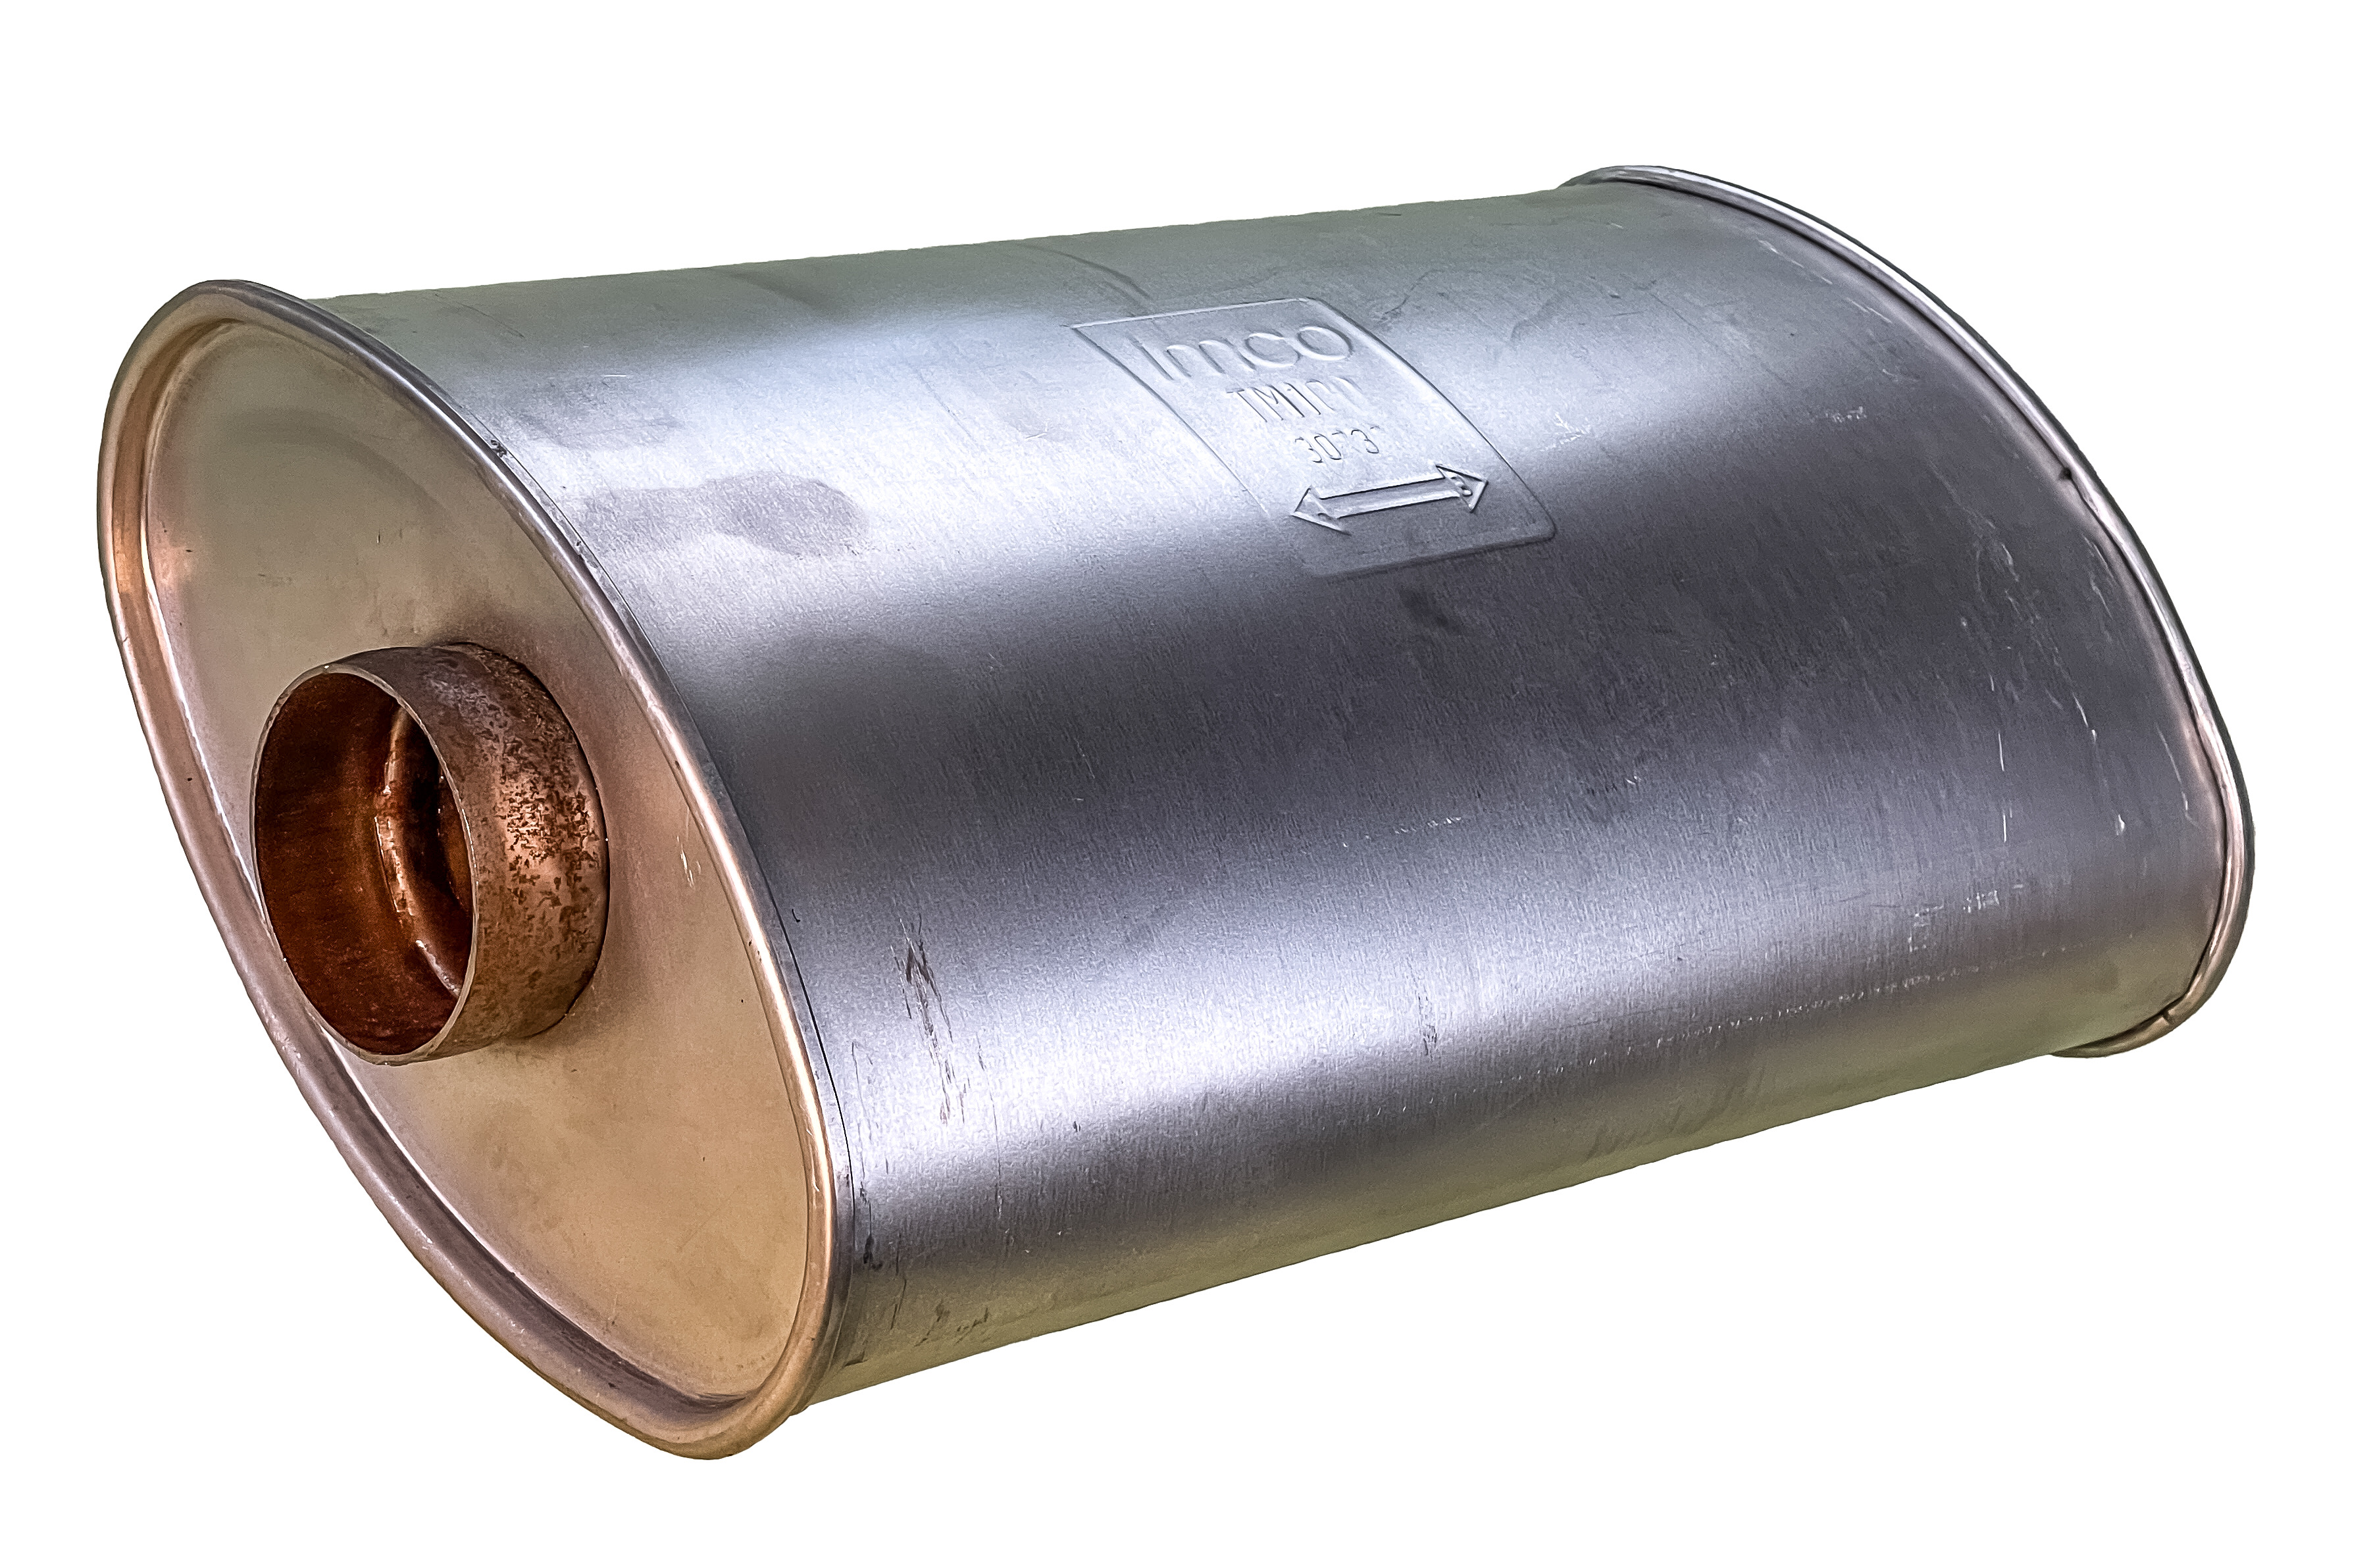 IMCO UNIVERSAL EXHAUST MUFFLER SINGLE CENTERED INLET / DUAL OUTLET / NON REVERSIBLE